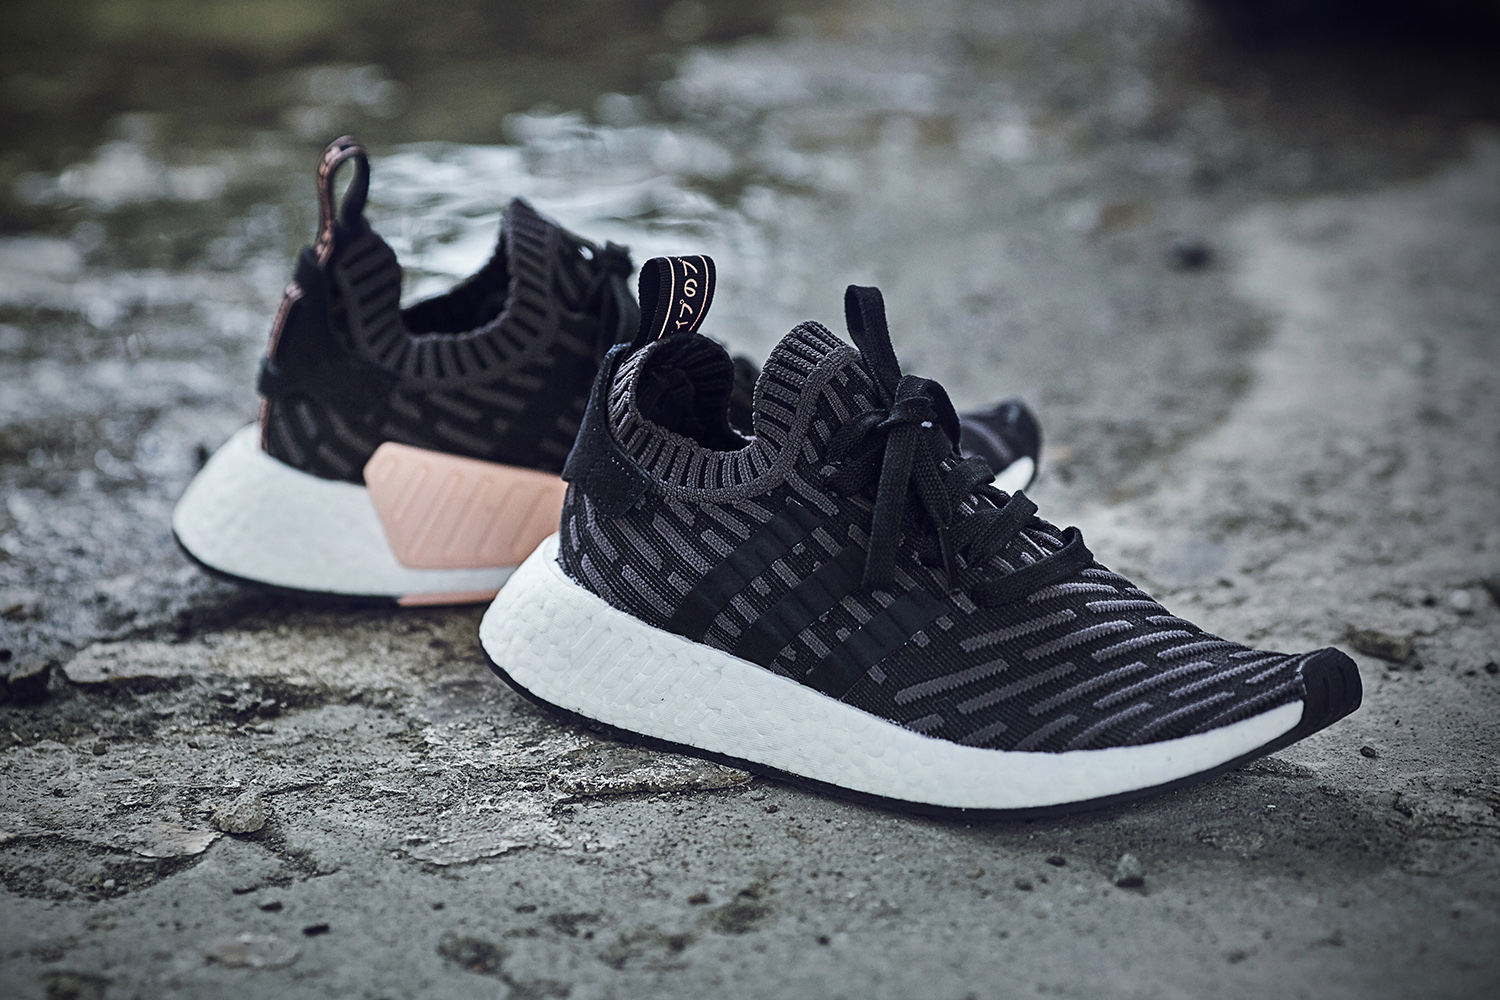 adidas-originals-nmd_r2-ntd6800_%e5%a5%b3%e6%80%a7%e9%9e%8b%e6%ac%be-1